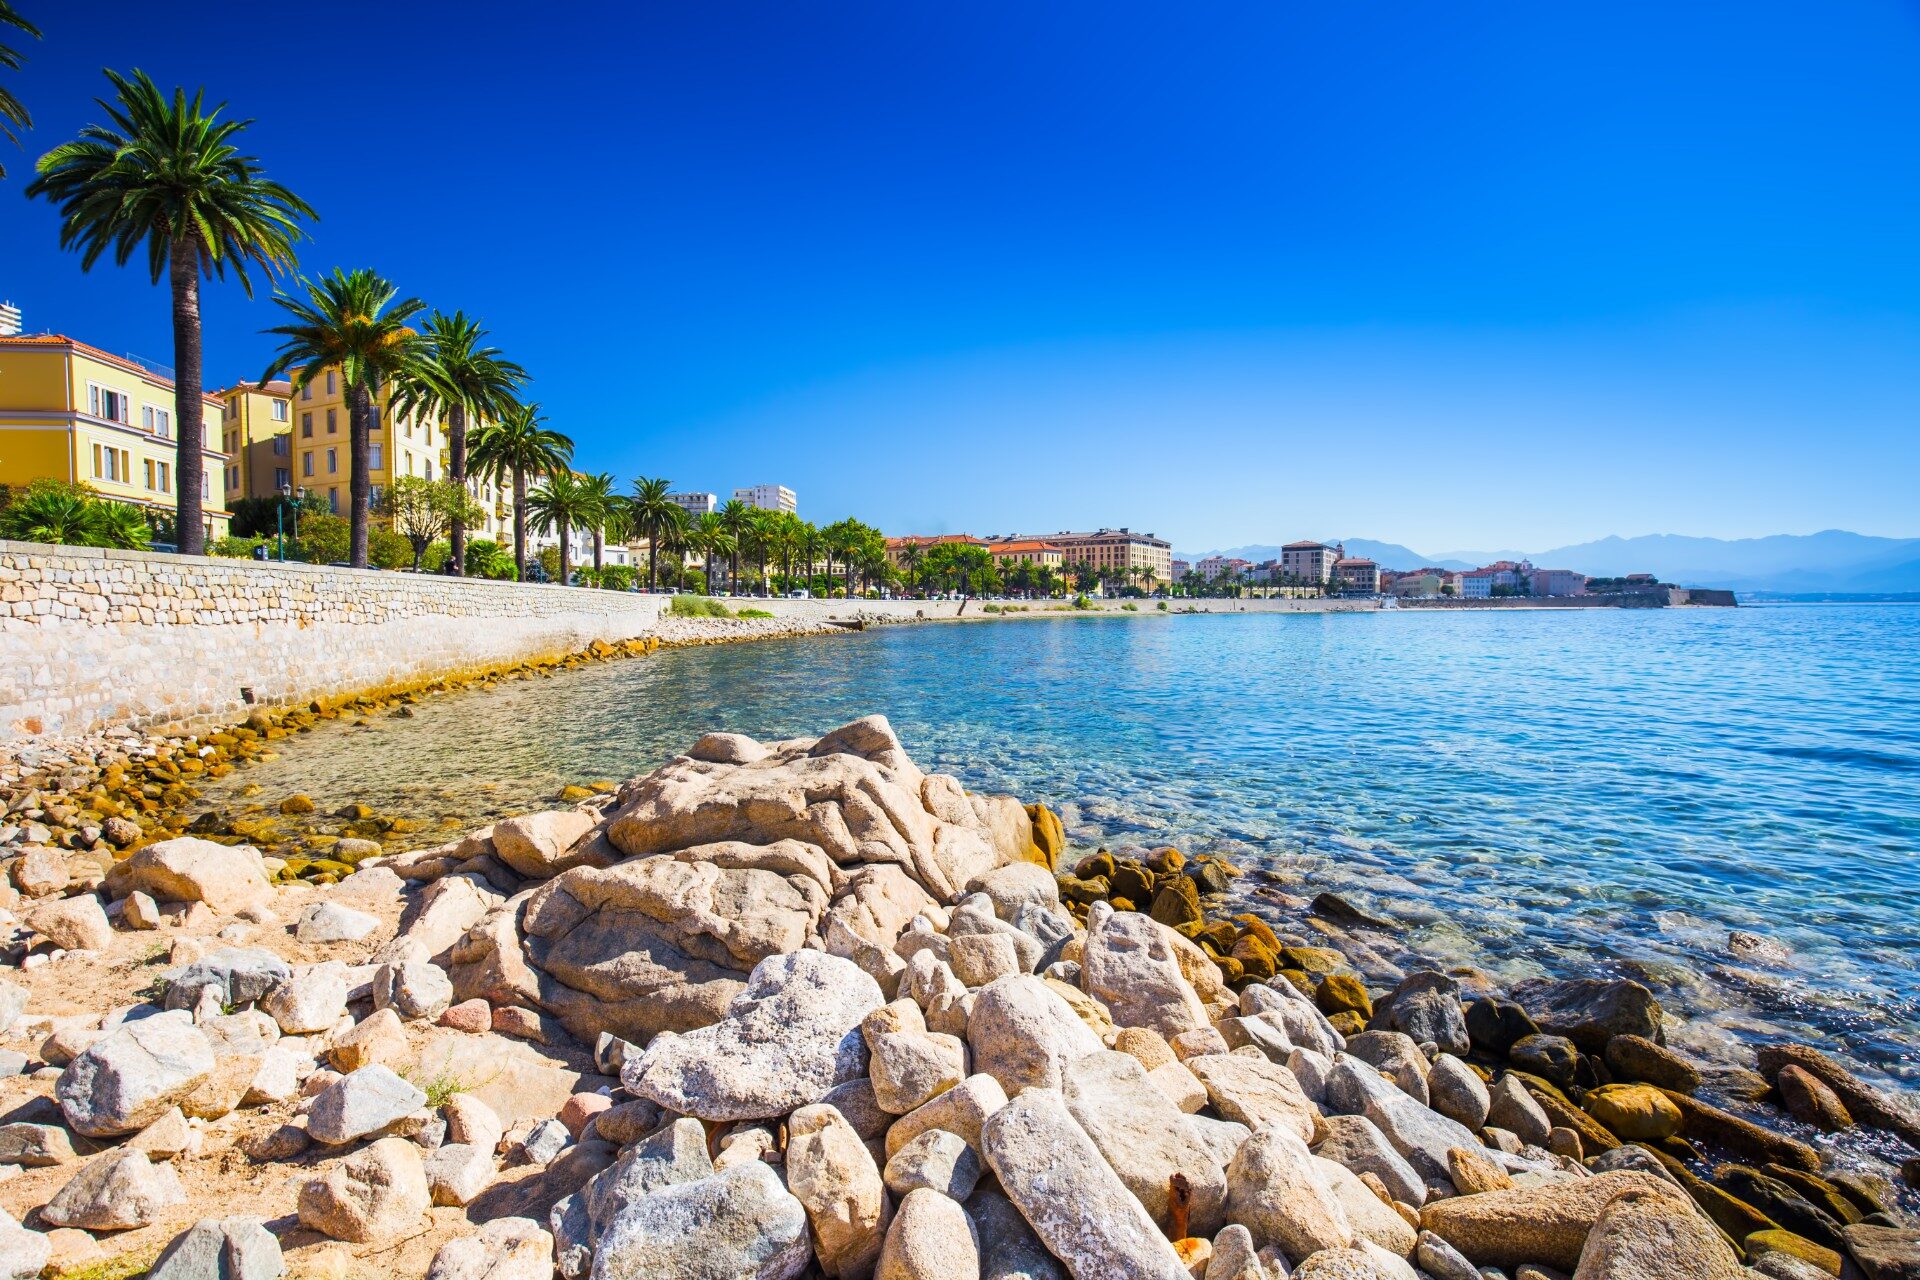 Insider’s Guide to Ajaccio, France | Celebrity Cruises